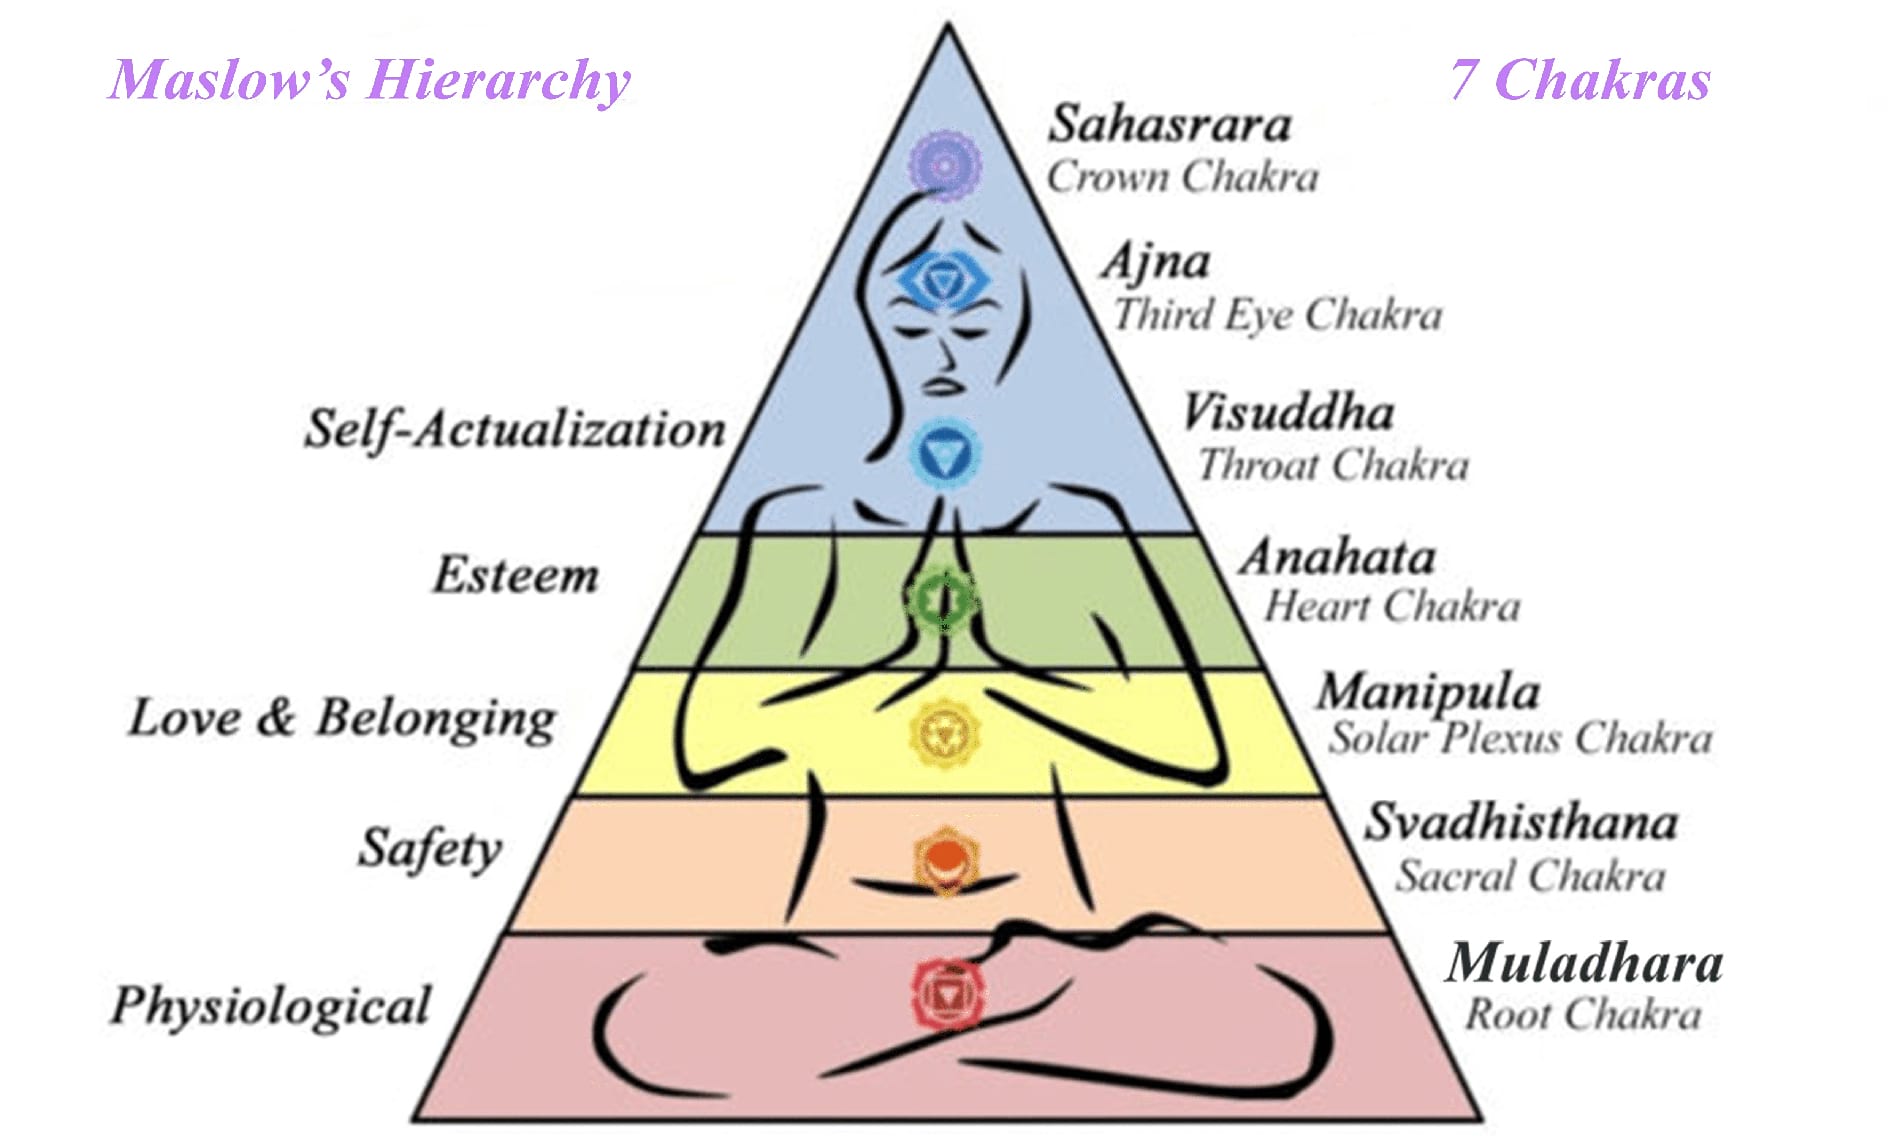 Depiction of Maslow's Hierarchy vs. 7 Chakras